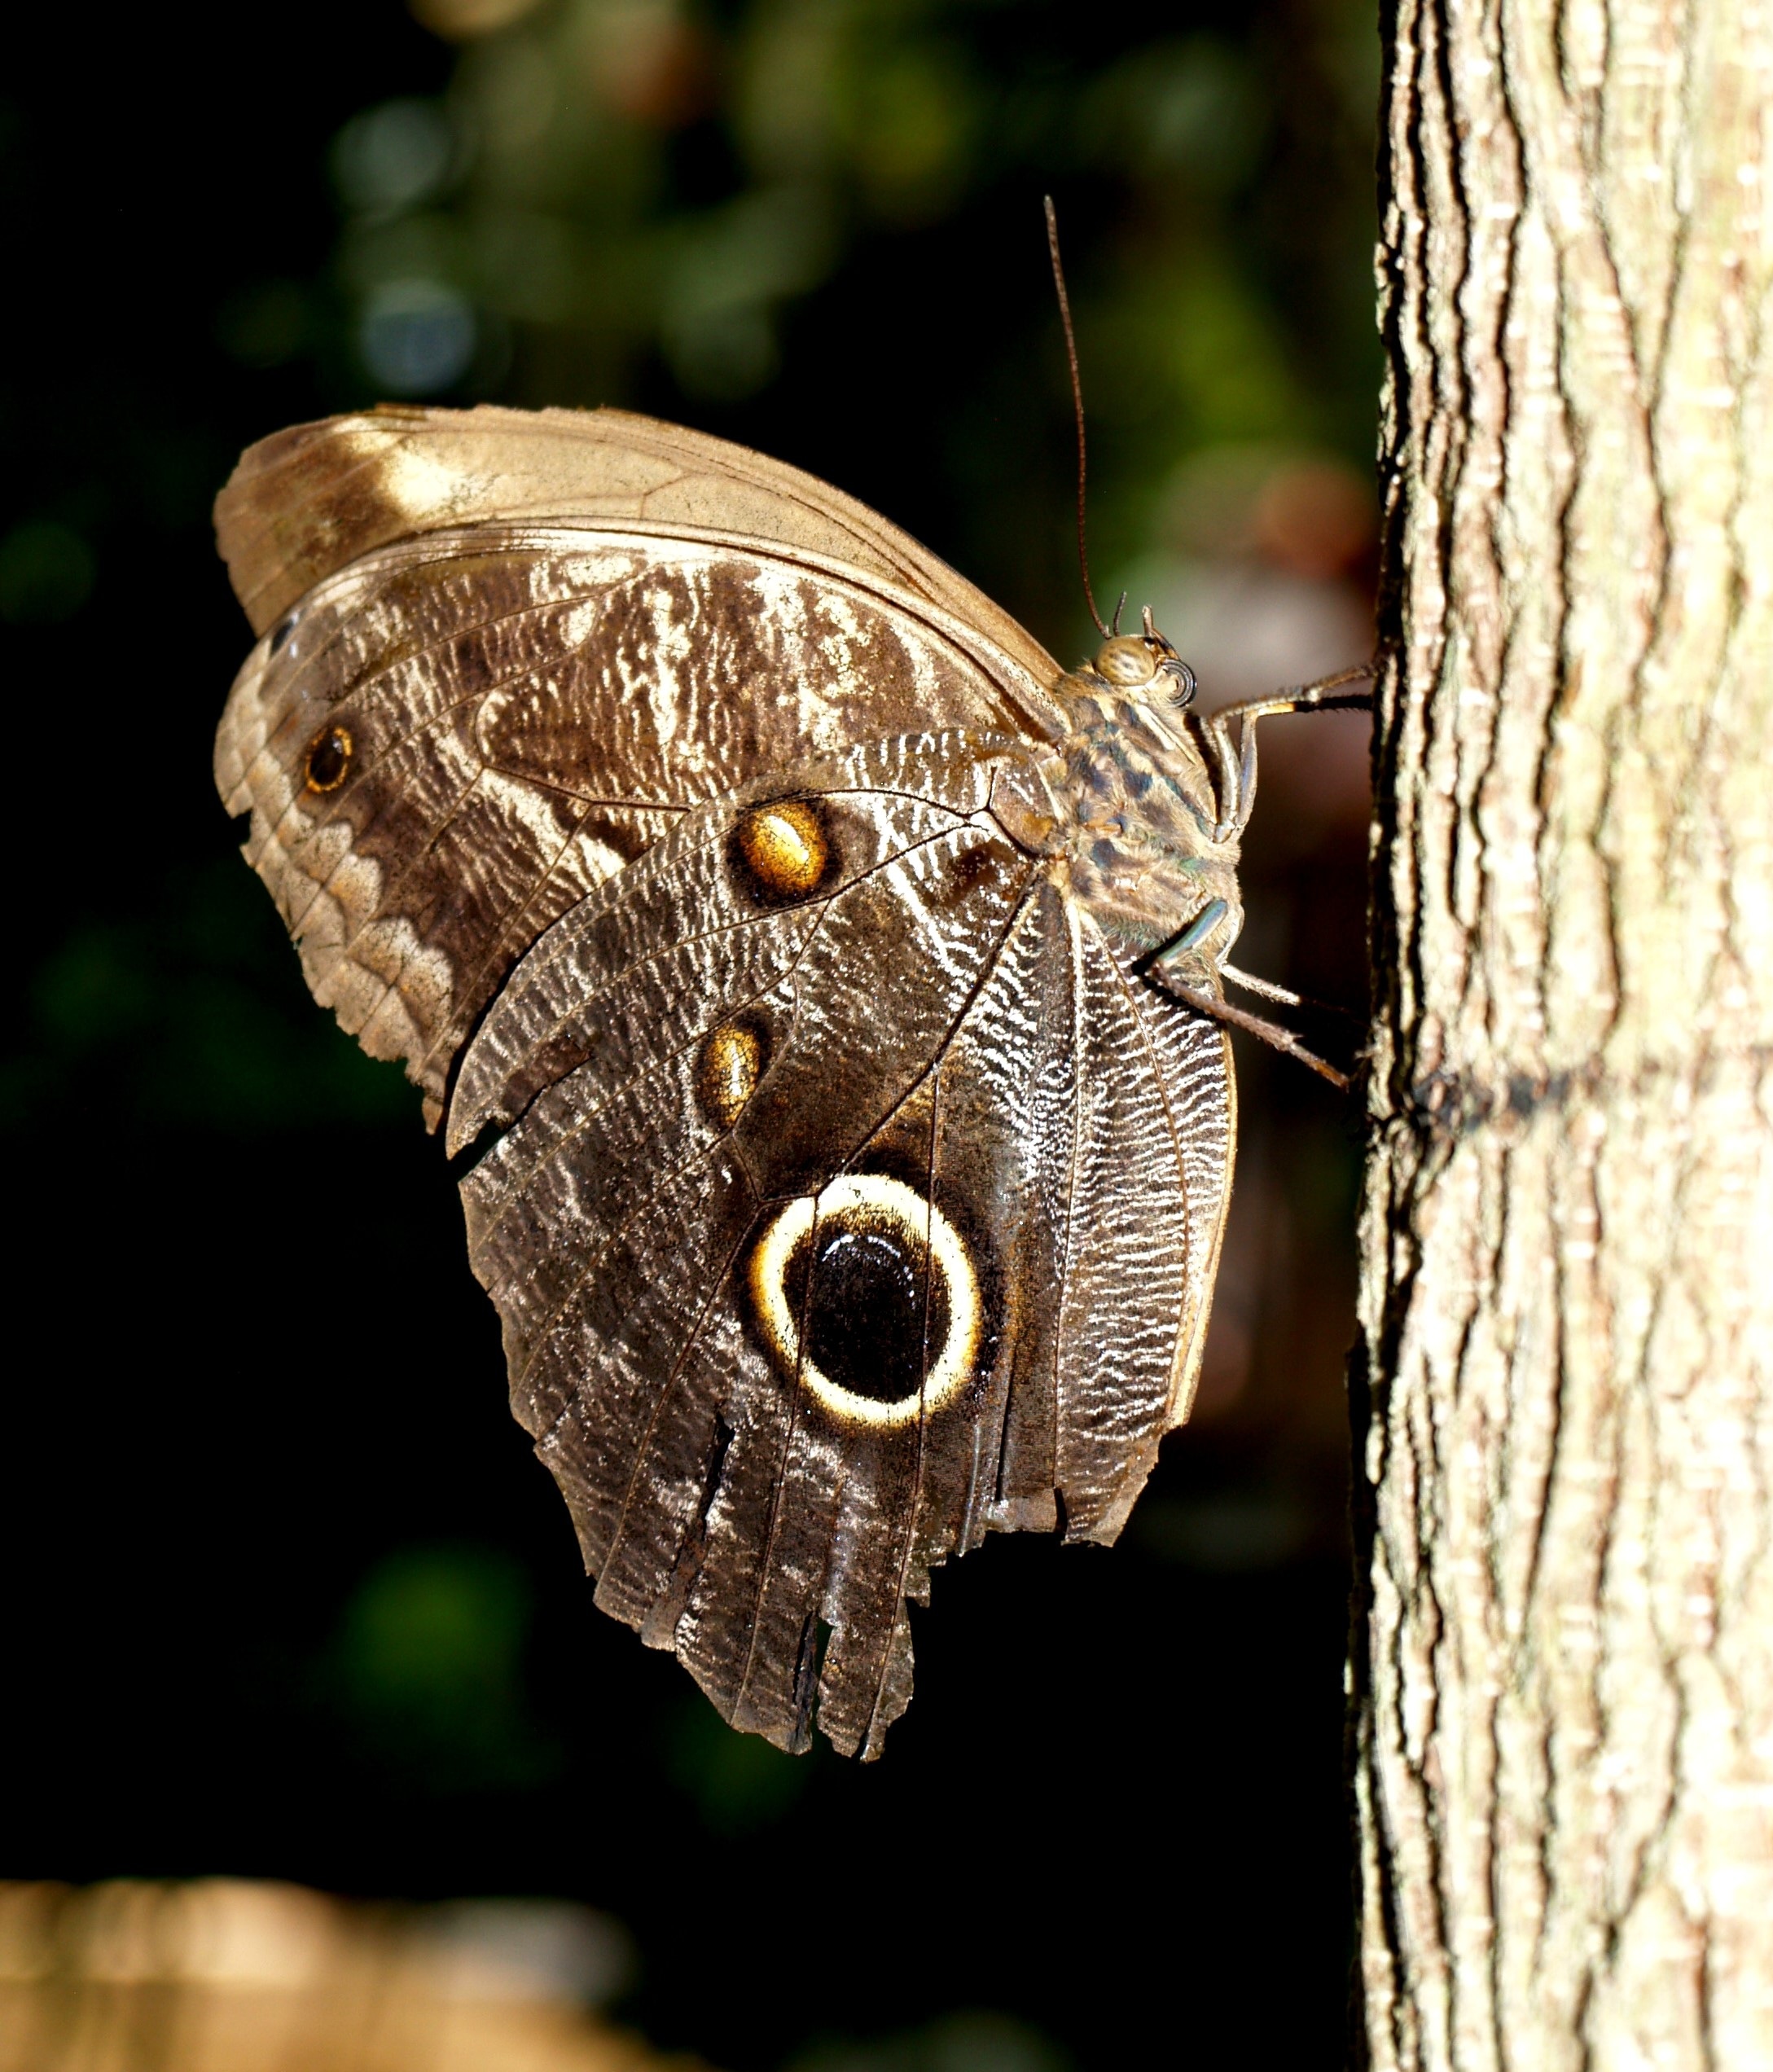 Drexel, Nature, Animal, Butterfly, tree trunk, close-up